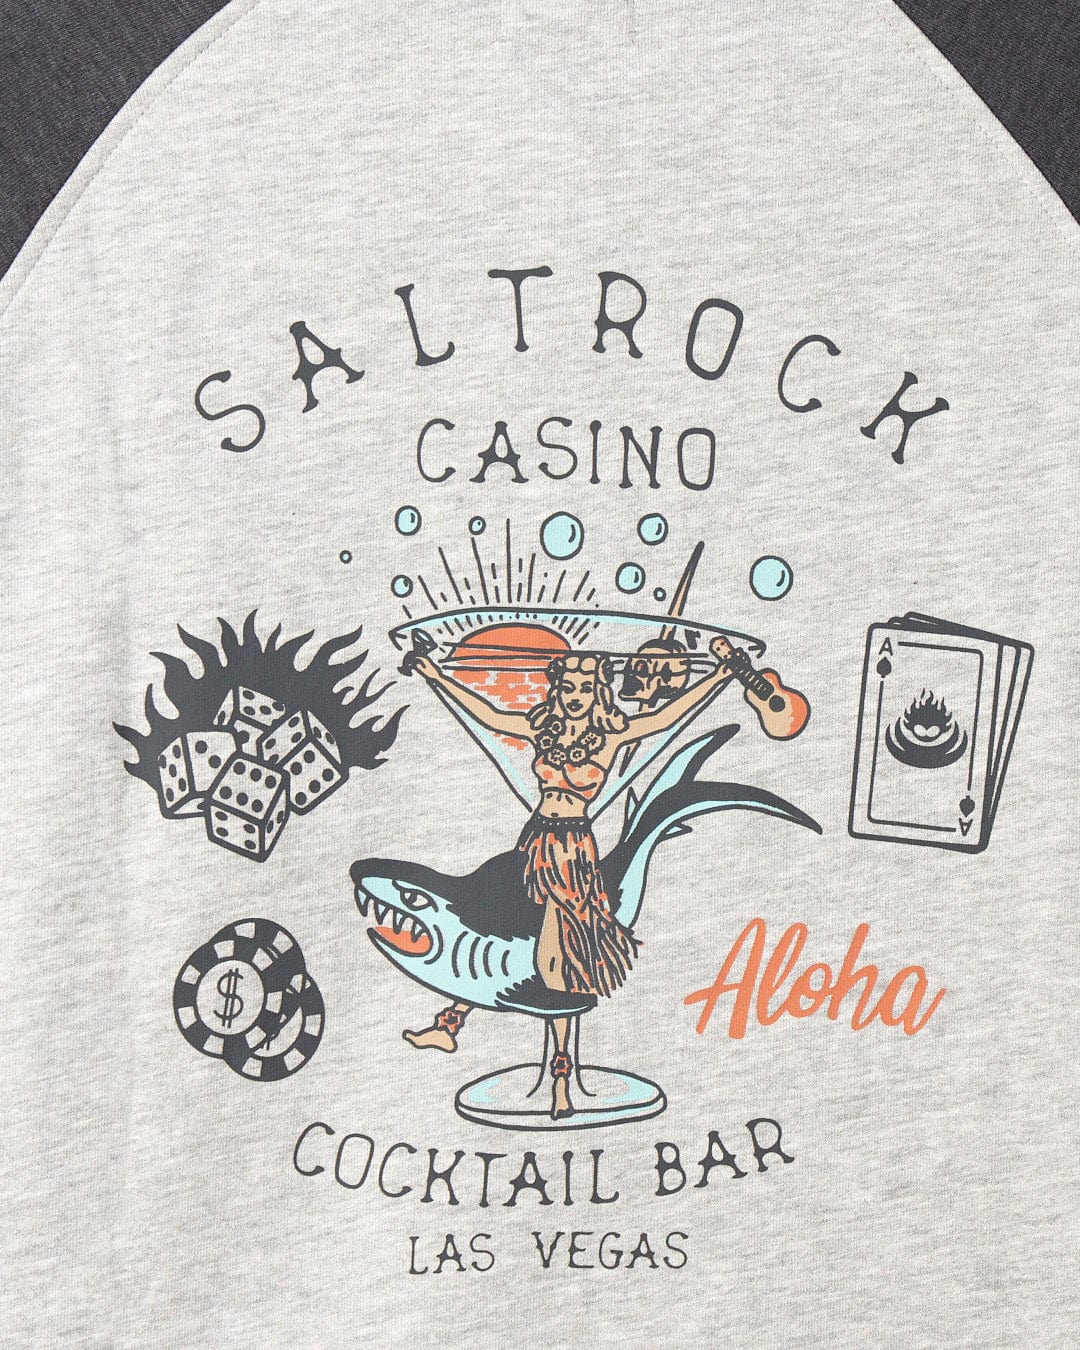 Graphic print of a tropical-themed casino and cocktail bar on Marl effect fabric with gambling elements on the Saltrock Vegas Cocktail - Mens Raglan Zip Hoodie - Grey.